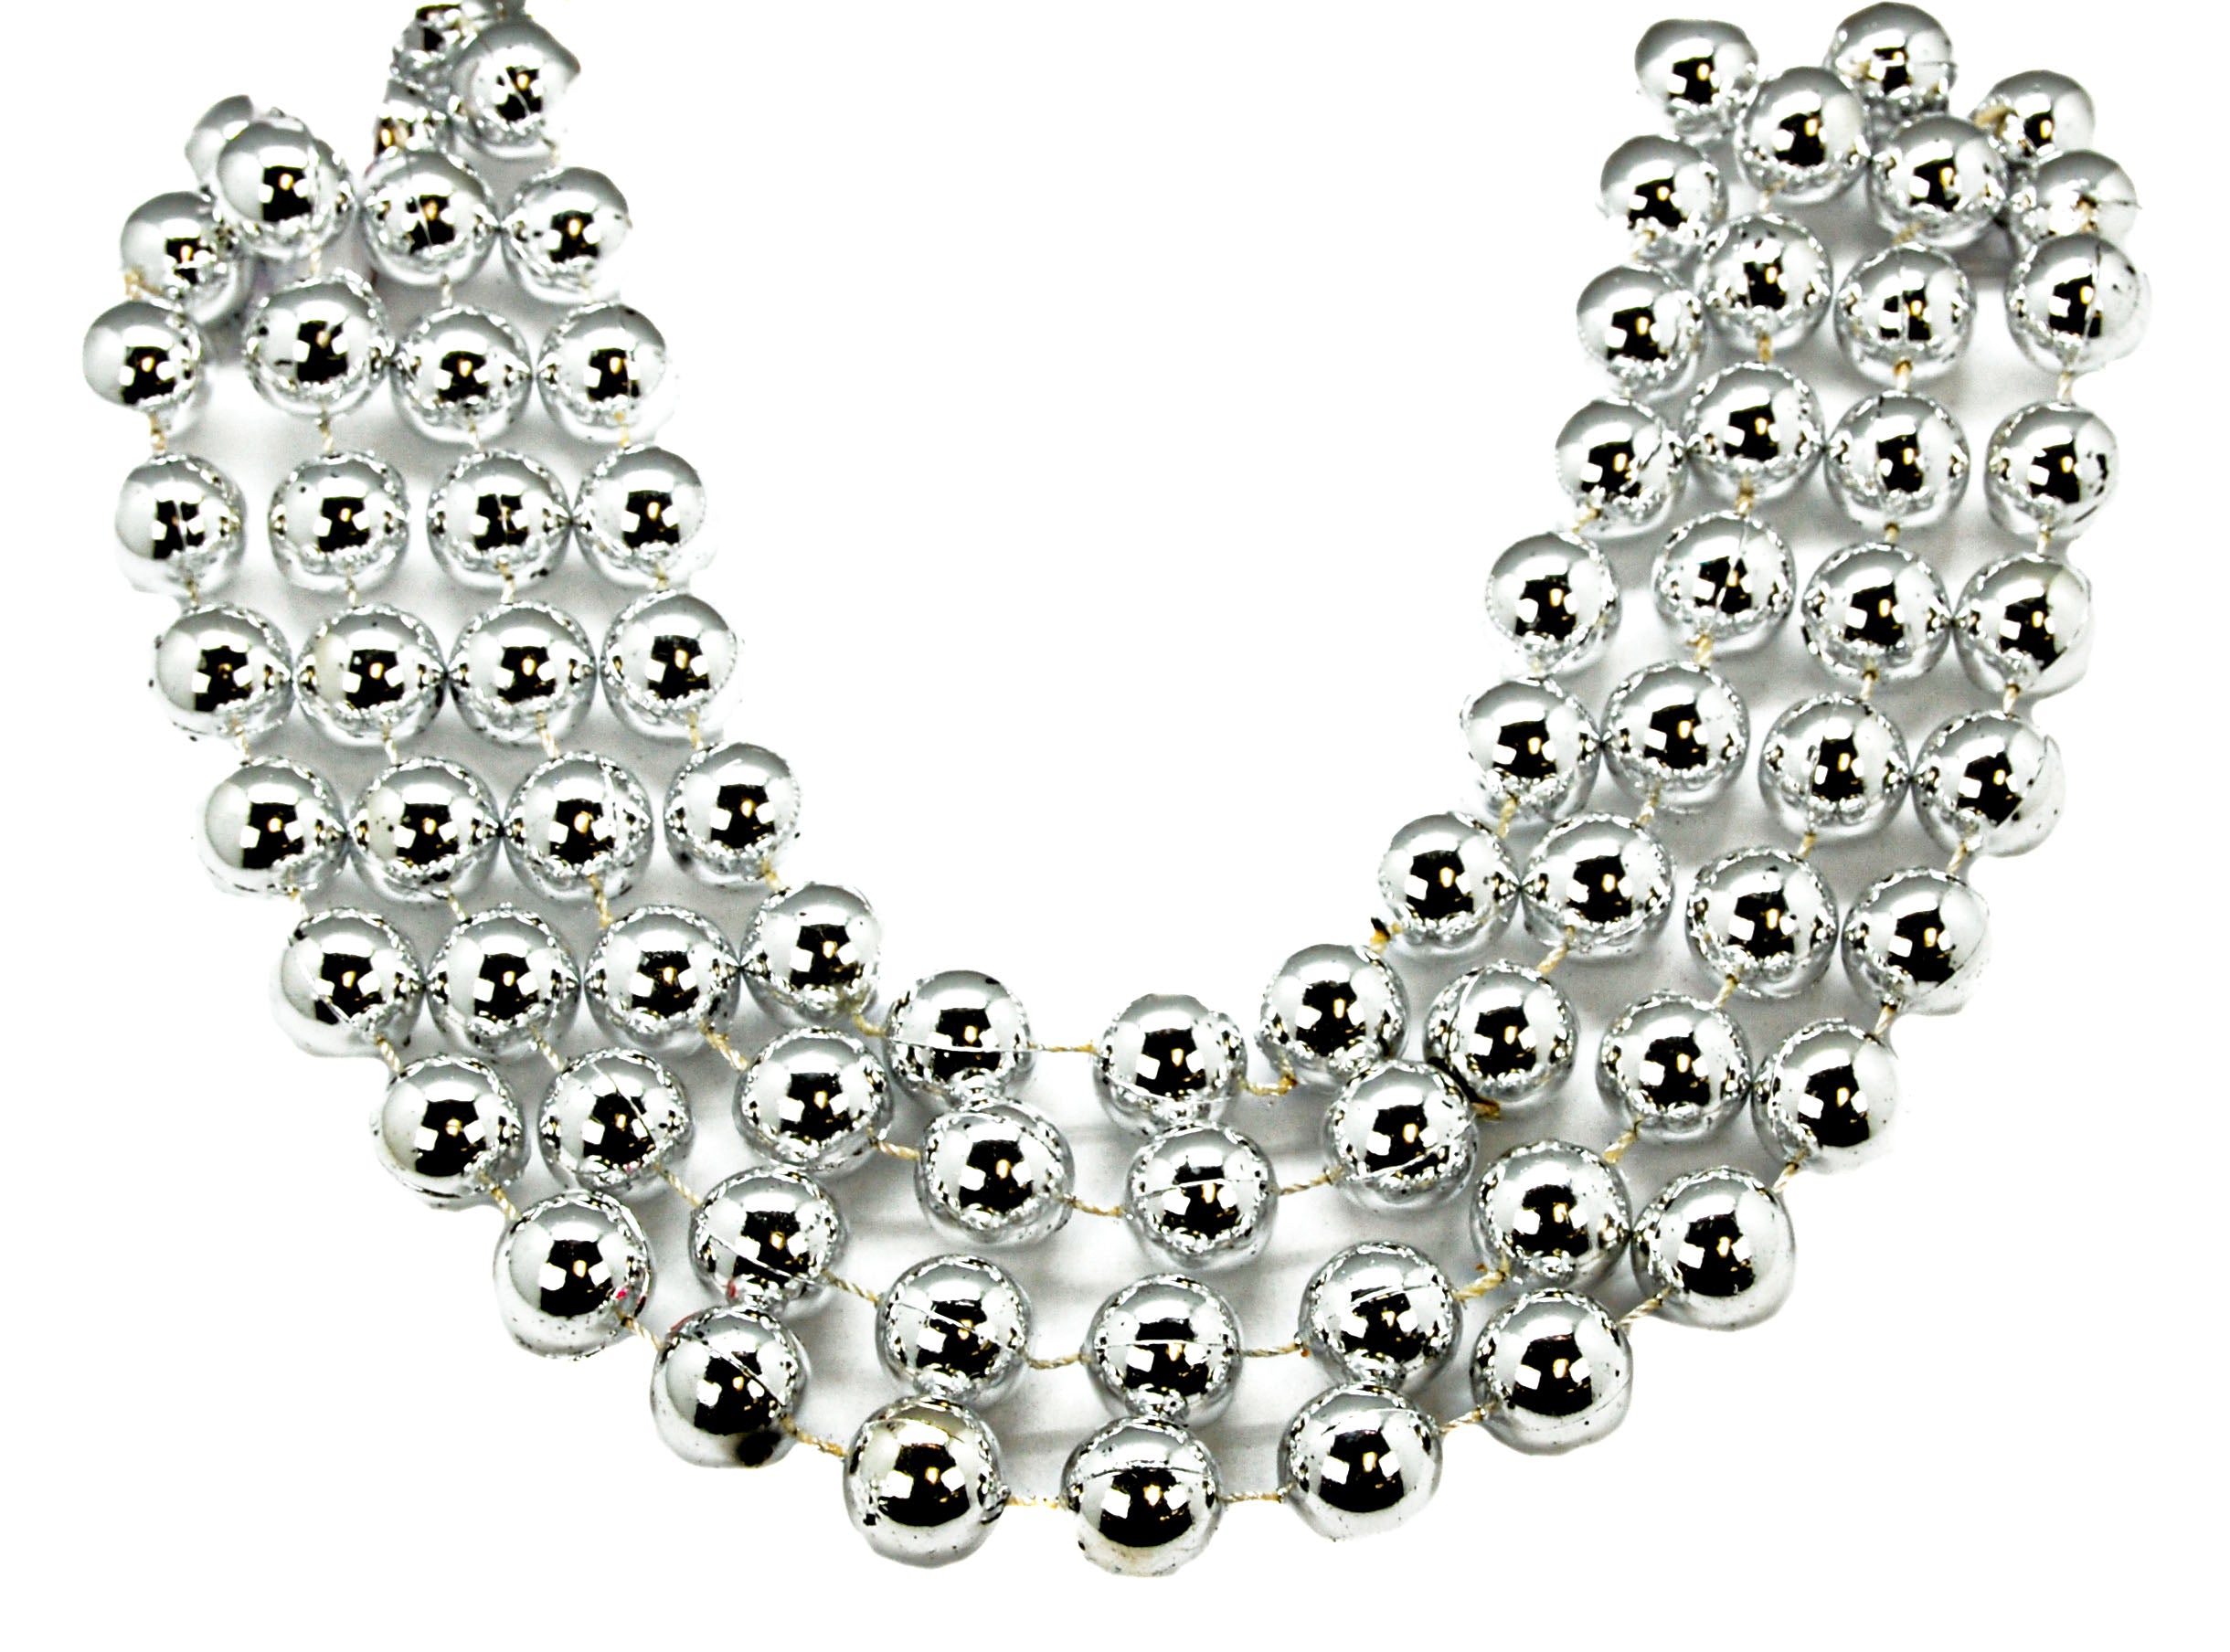 36 Round Red and Silver Faceted Mardi Gras Bead Necklace